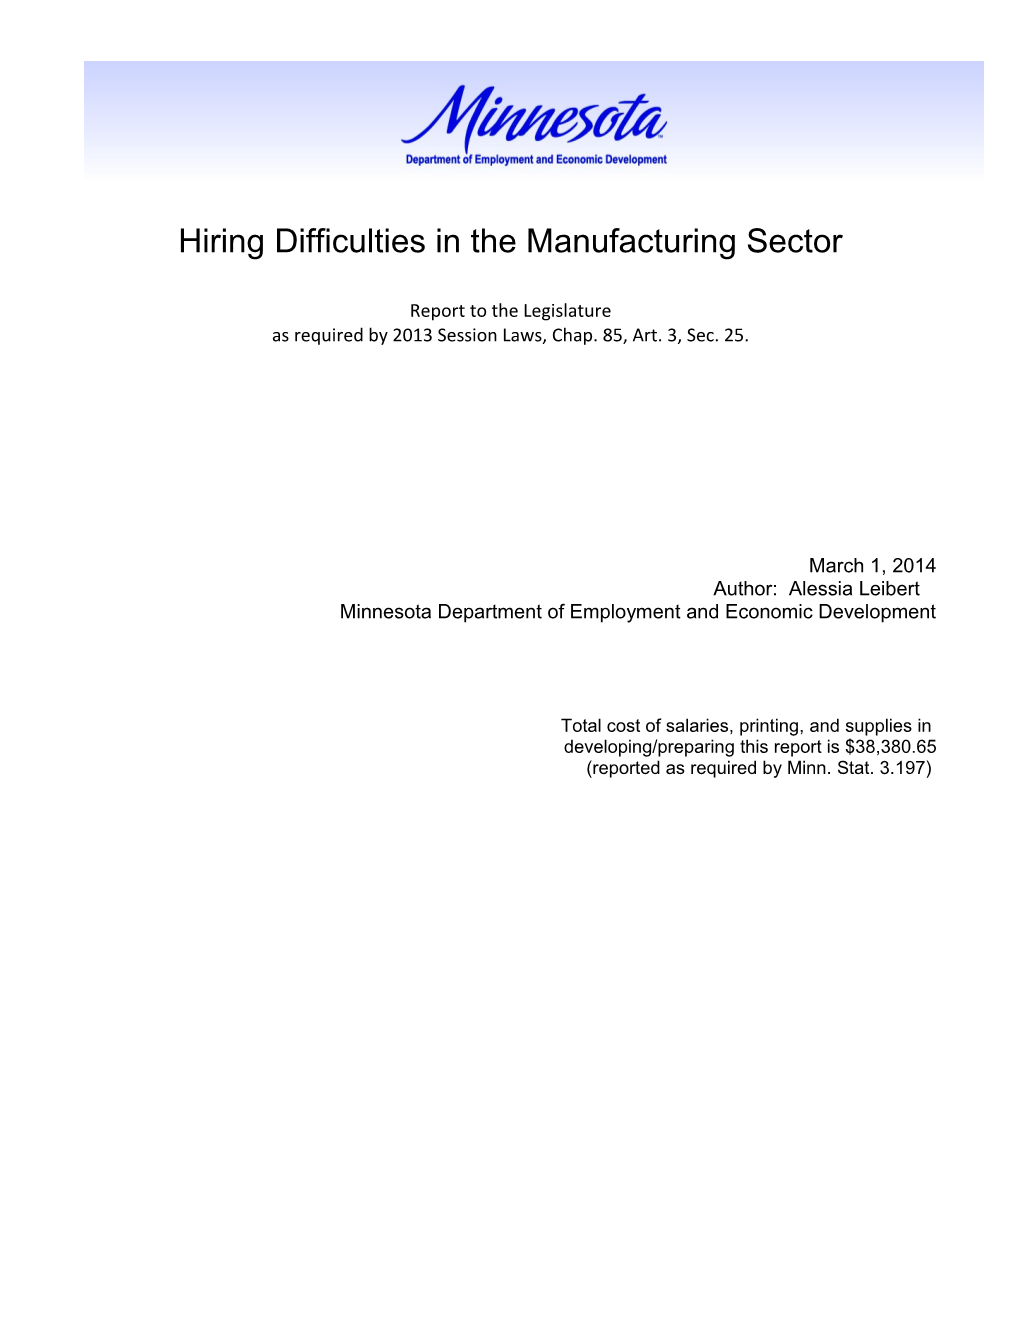 Hiring Difficulties in the Manufacturing Sector